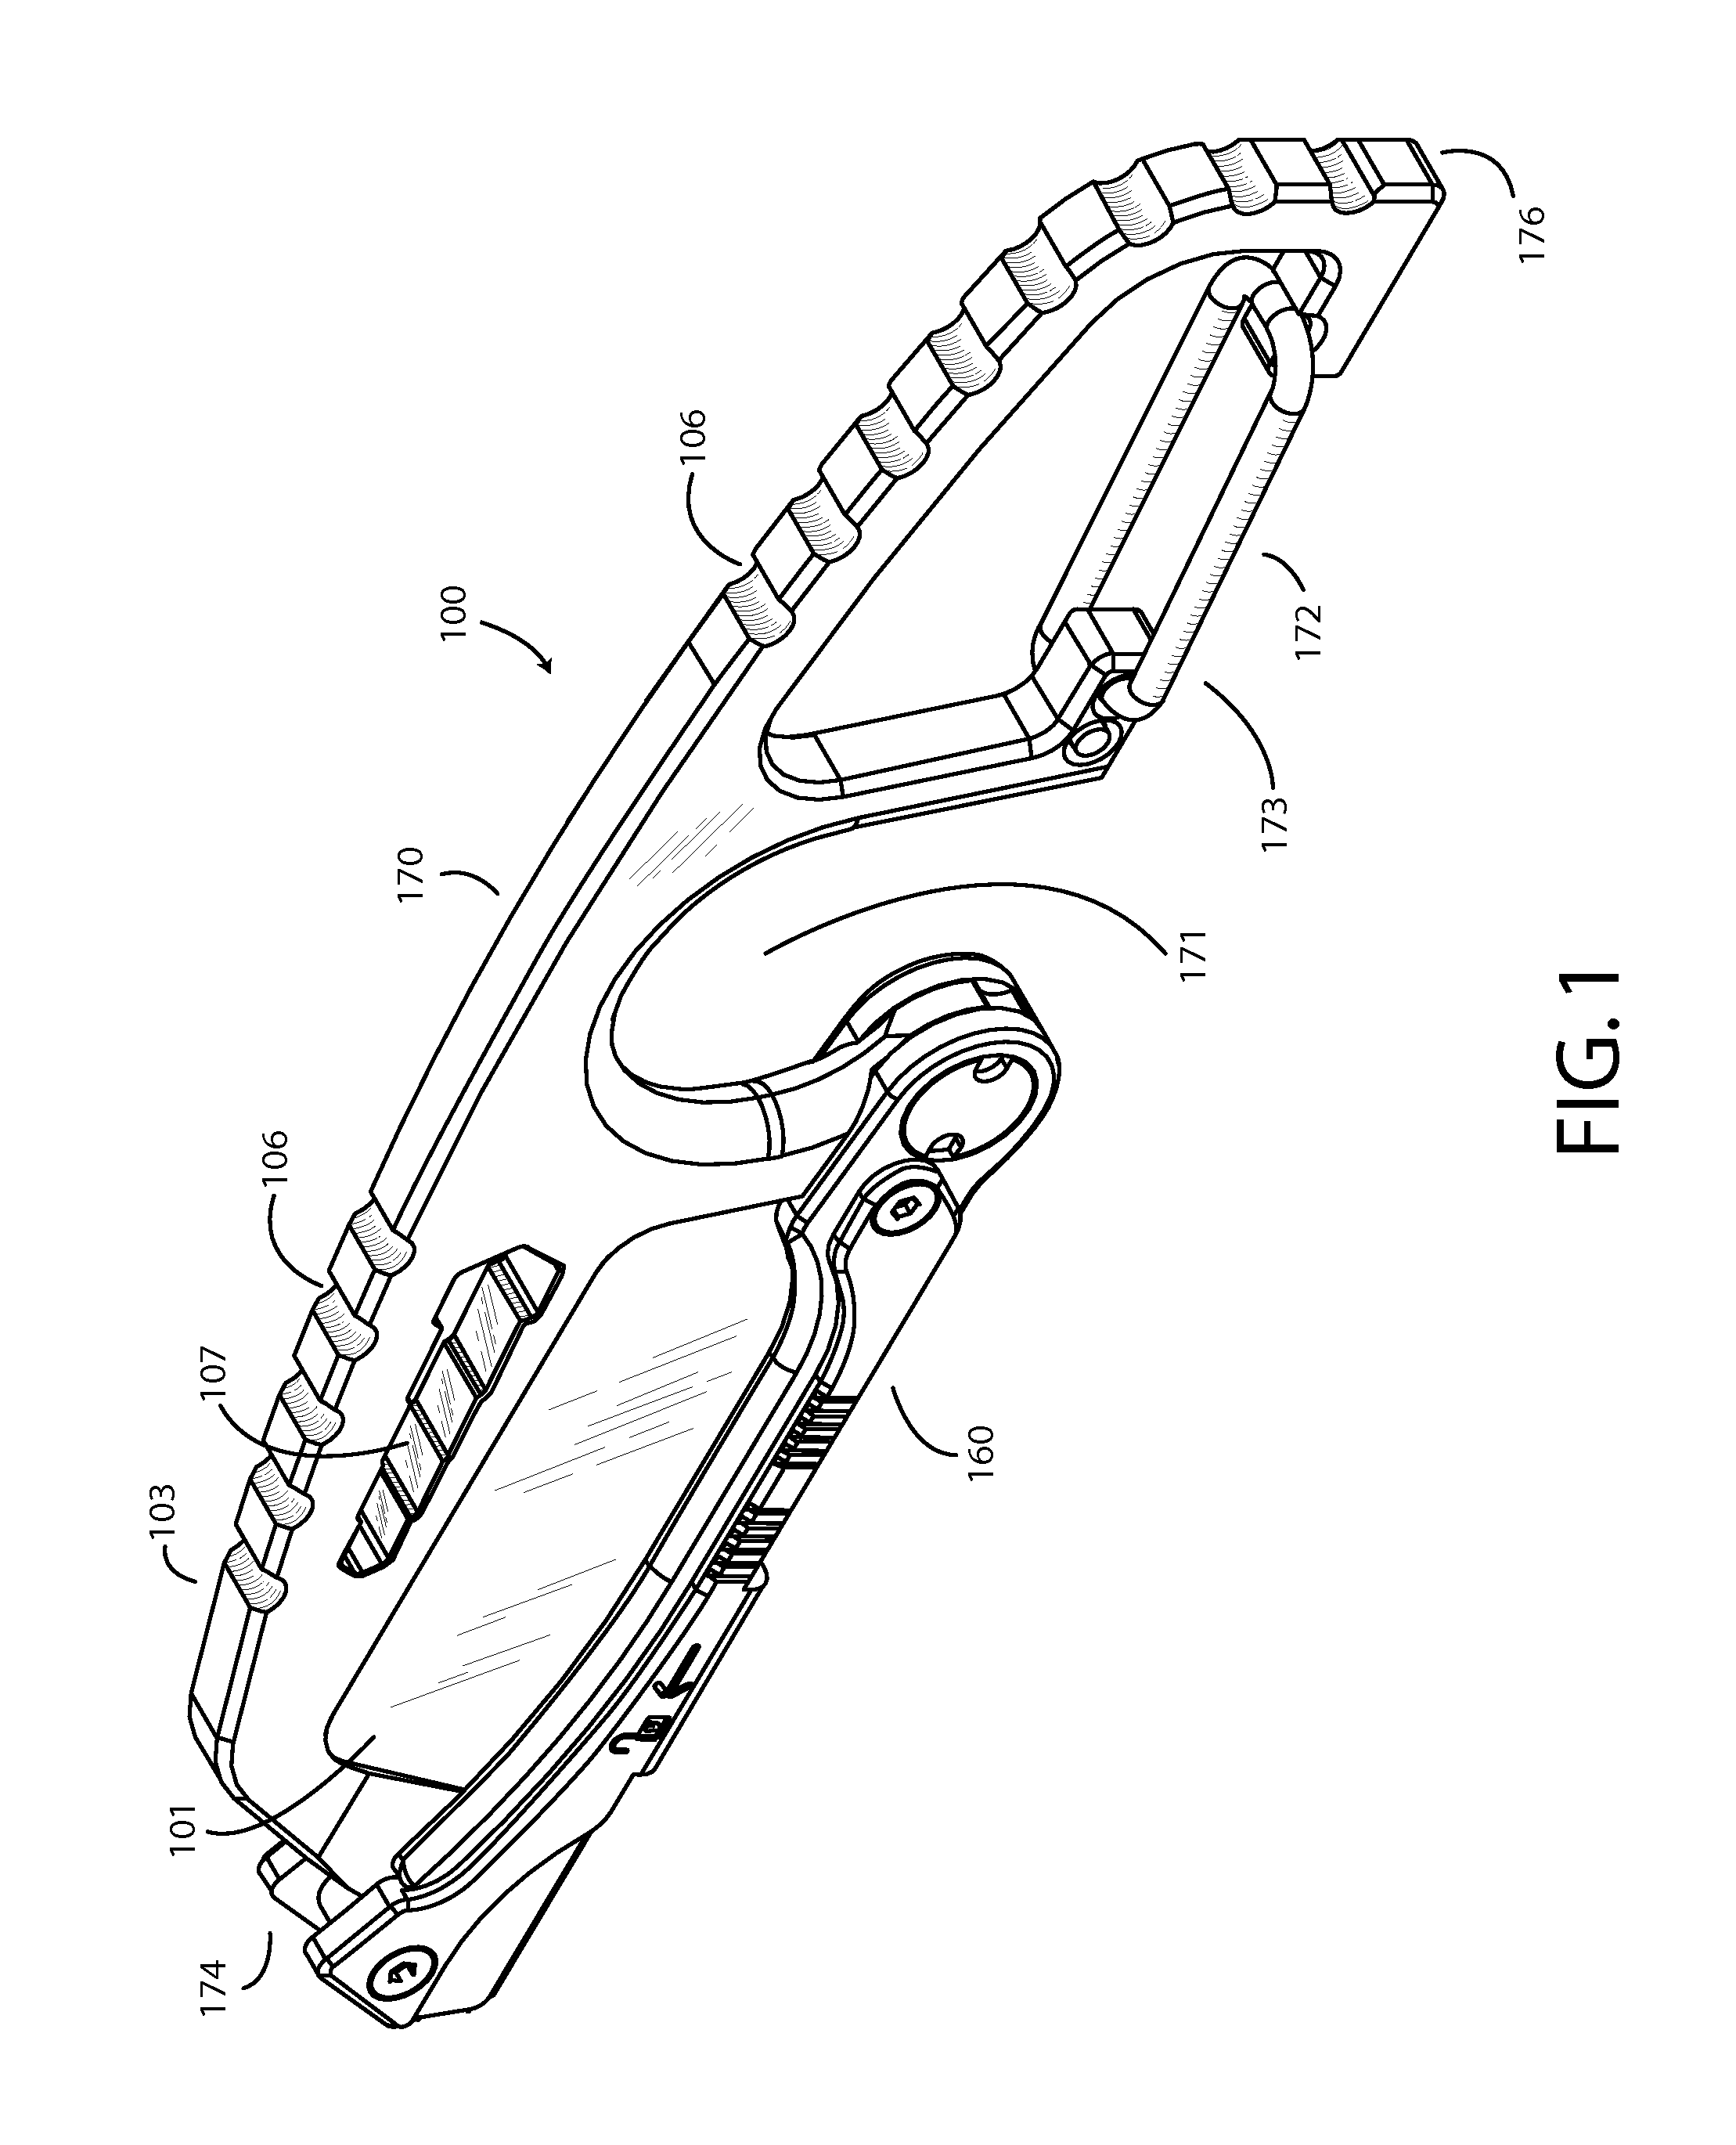 Survival knife with integrated moveable guard